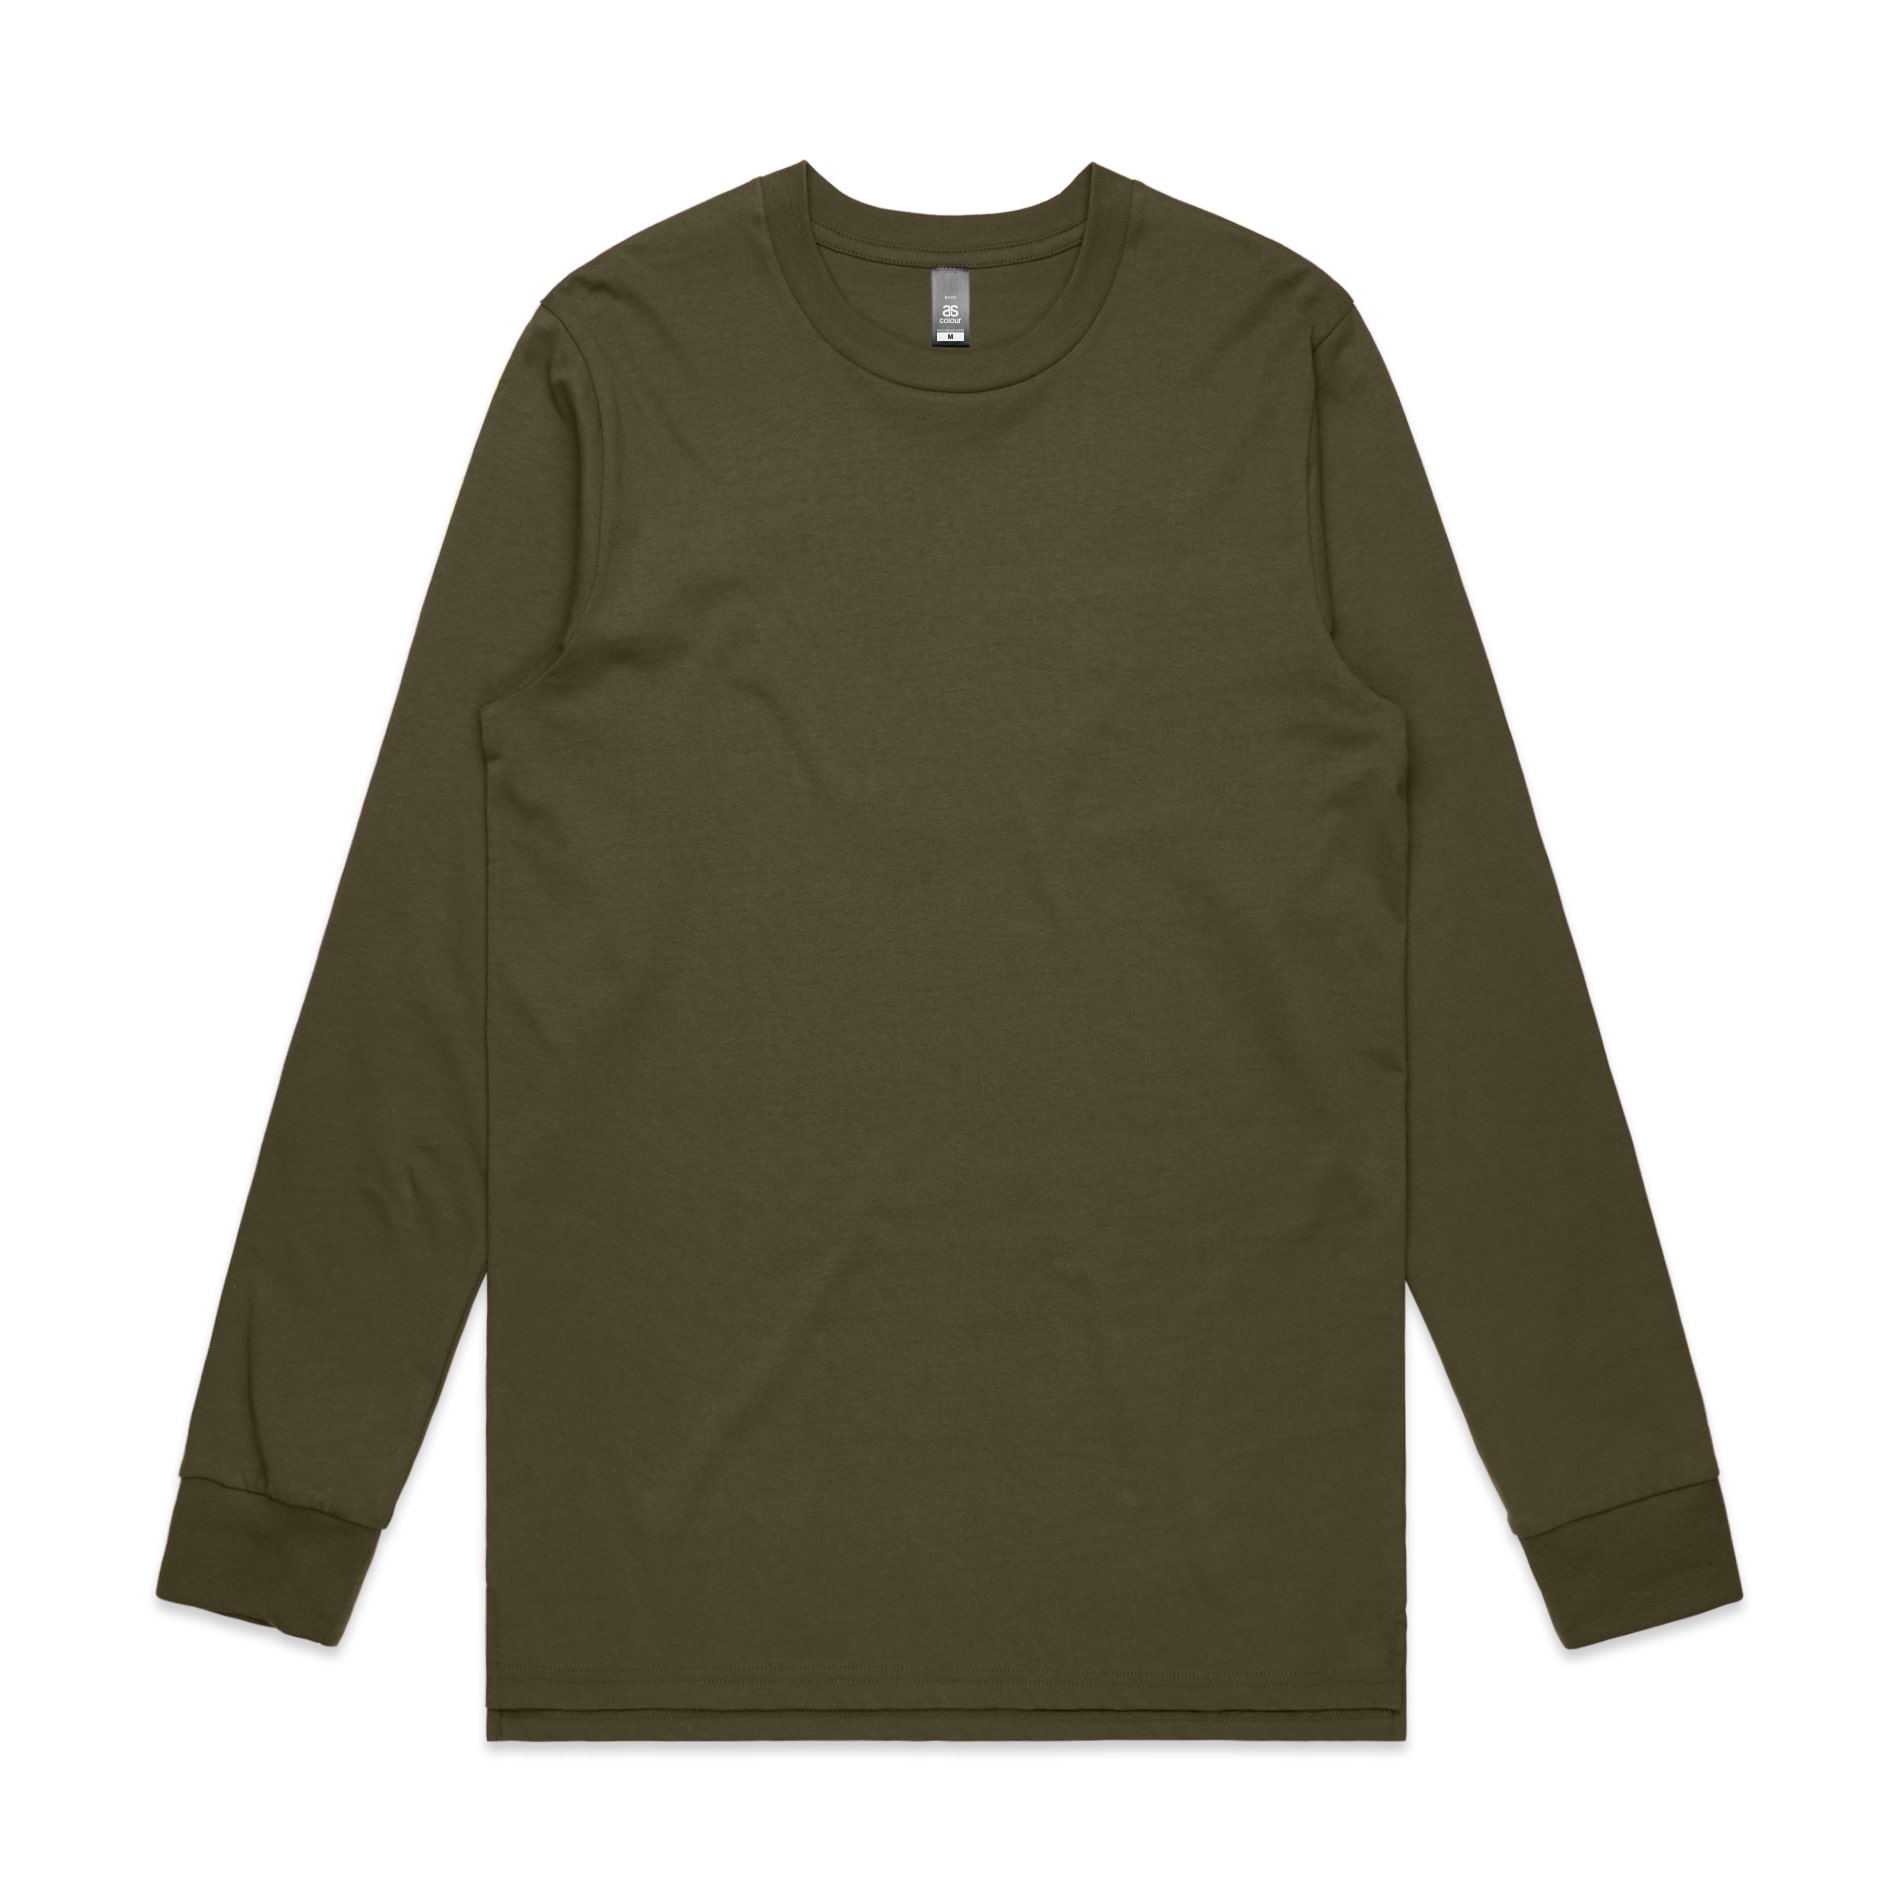 Design online product - 5029 base ls tee army